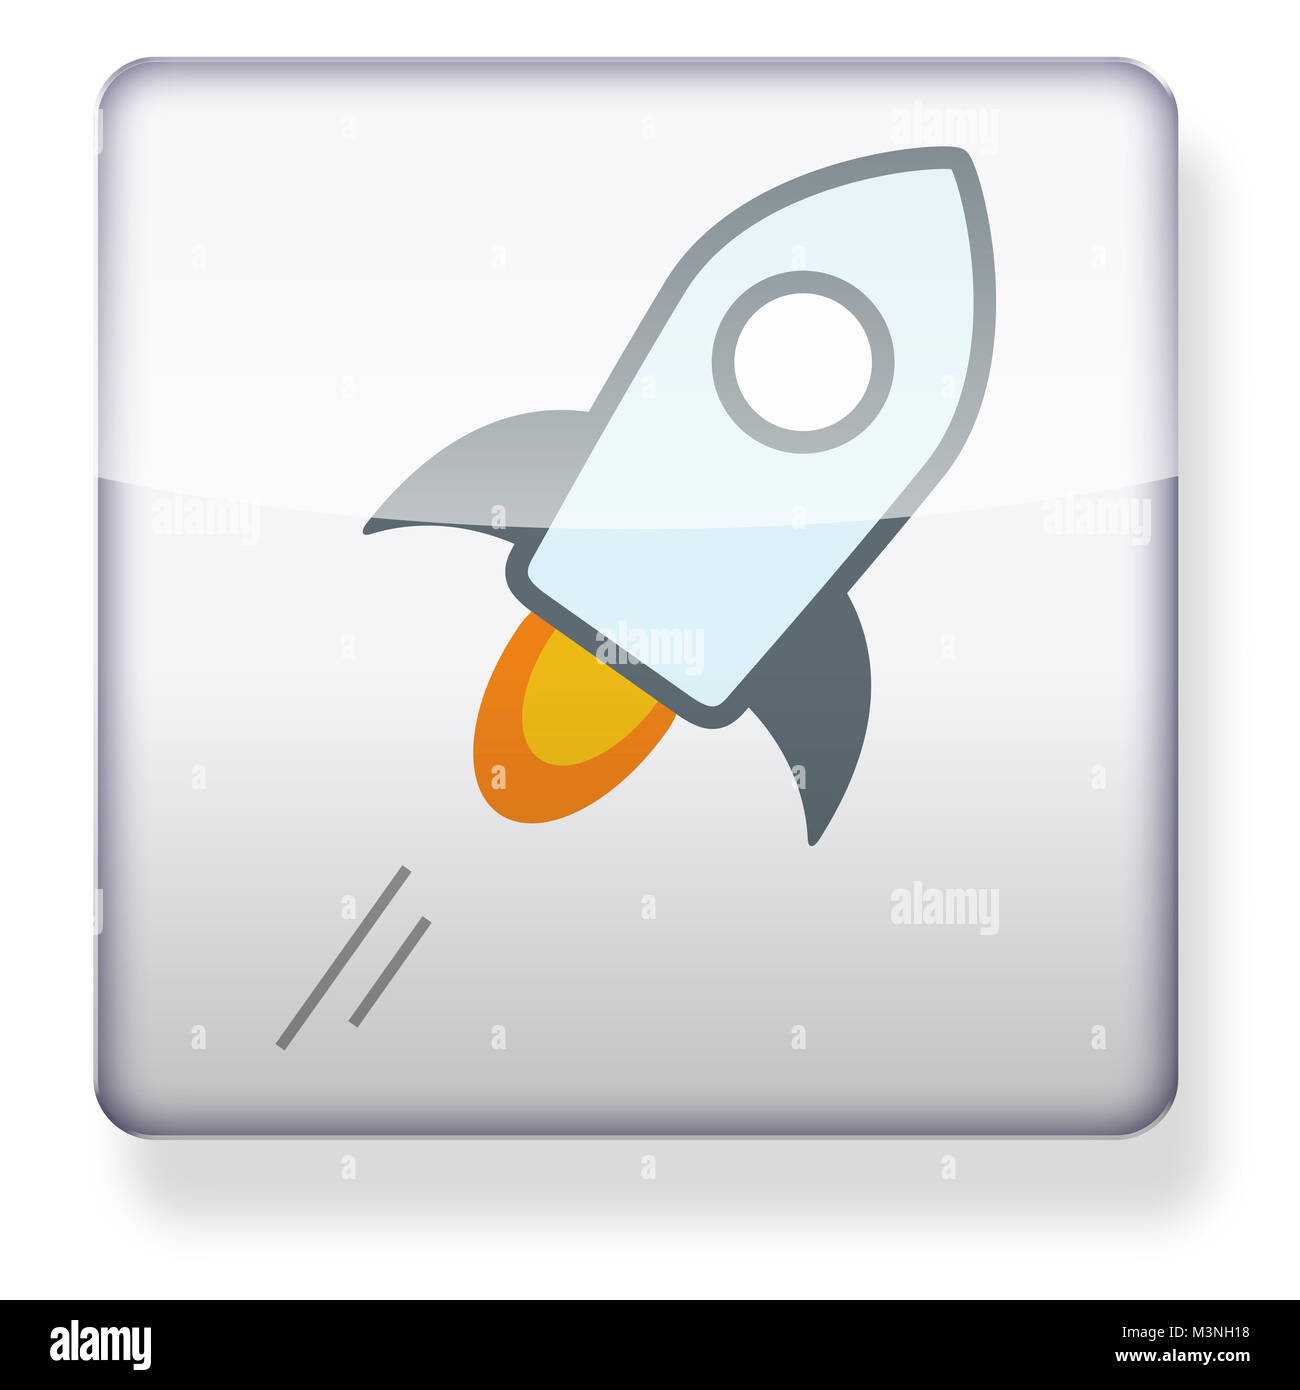 Stellar cryptocurrency XLM logo as an app icon. Clipping path included. Stock Photo